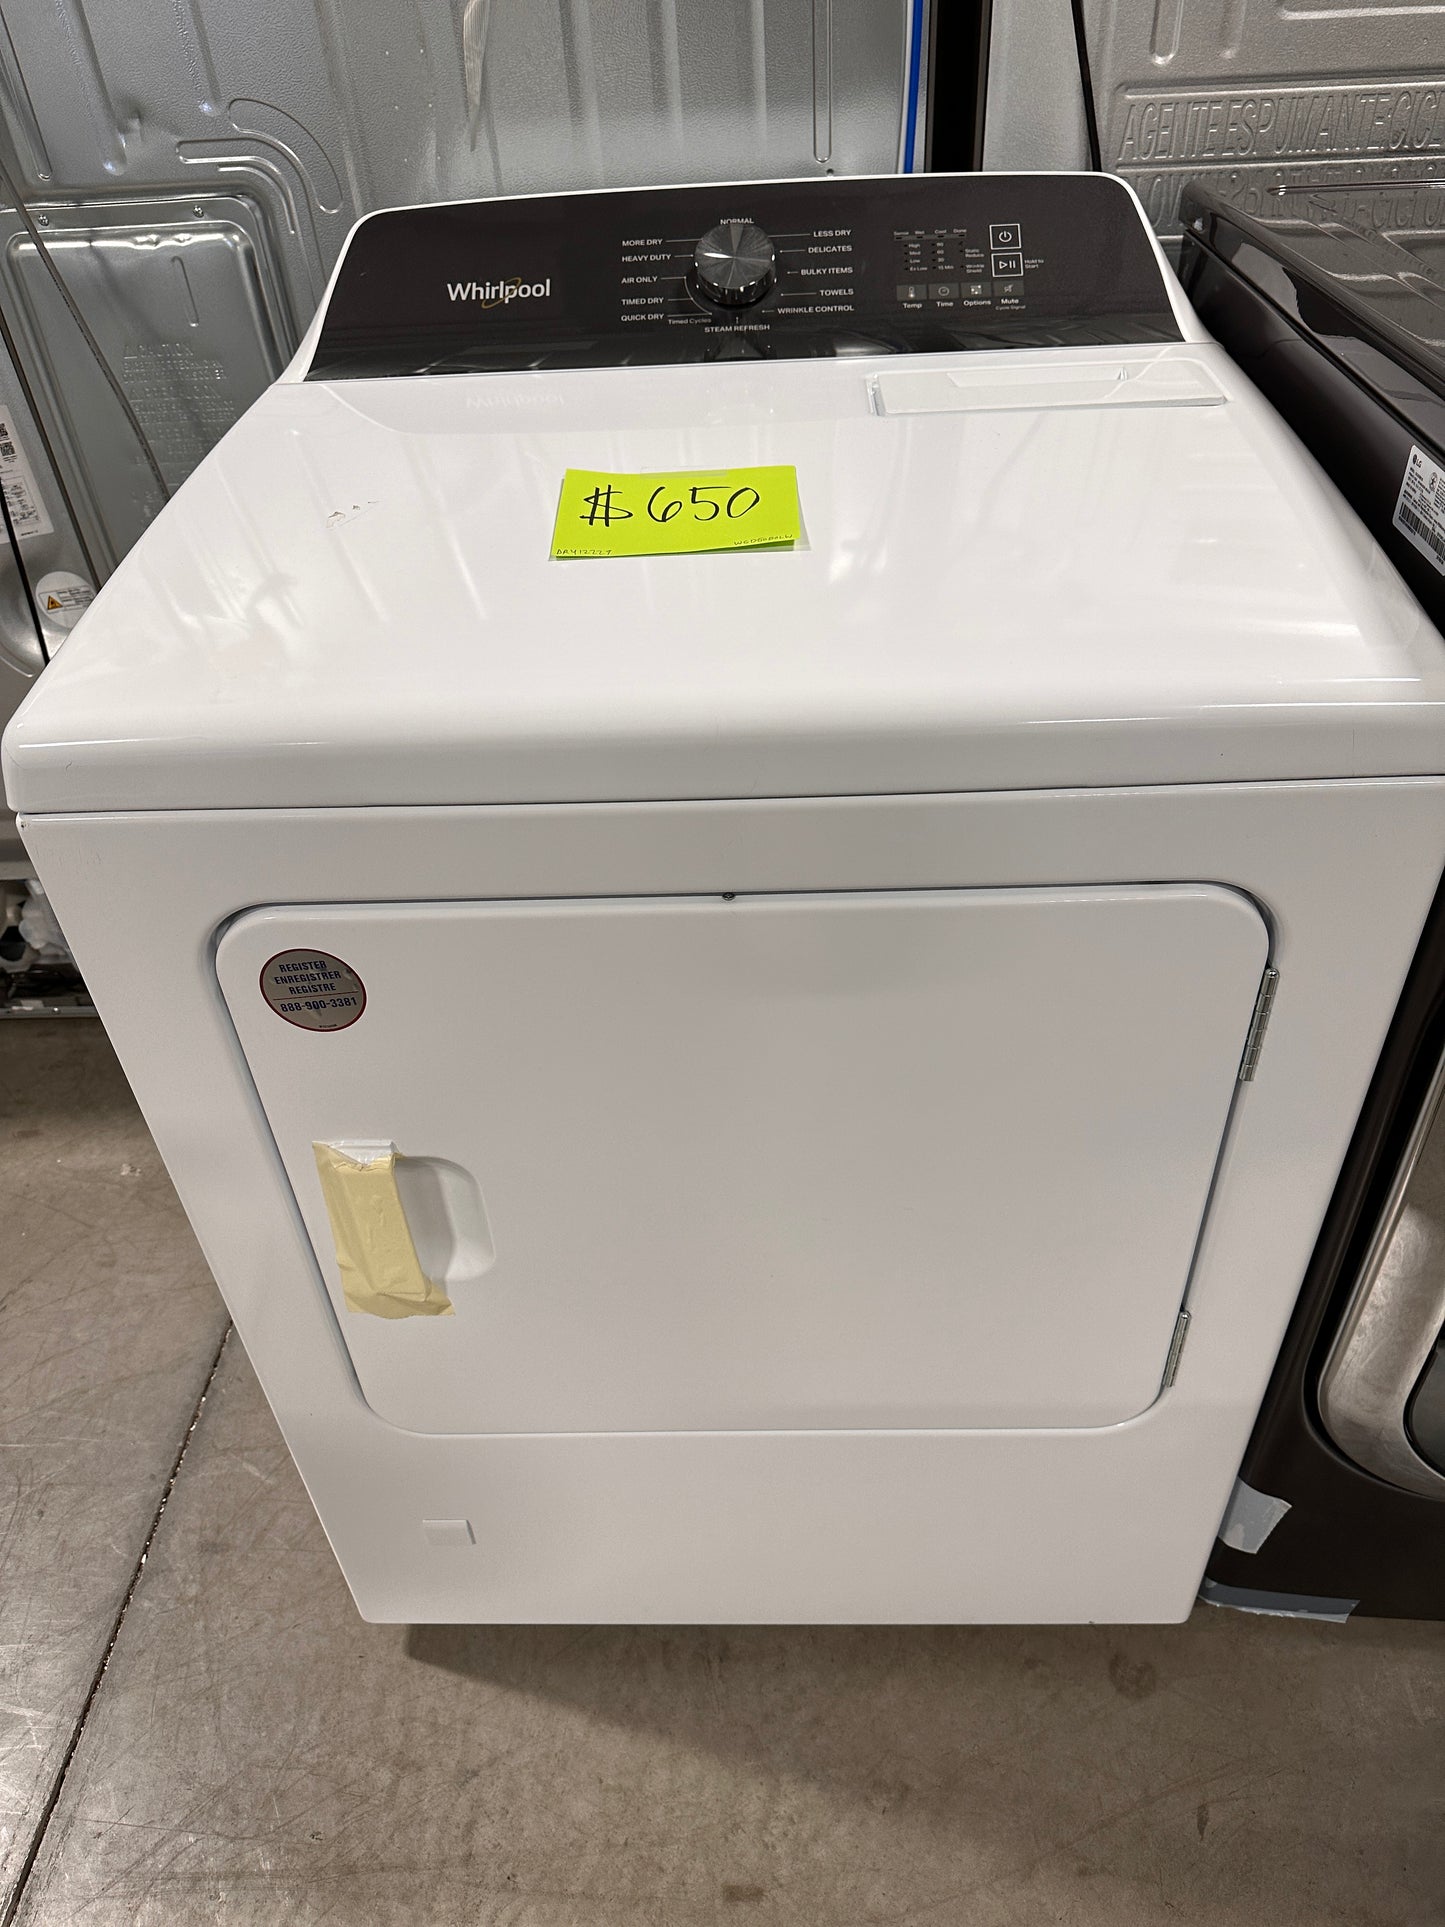 7 CU FT GAS DRYER WITH STEAM AND MOISTURE SENSING - DRY12229 WGD5050LW